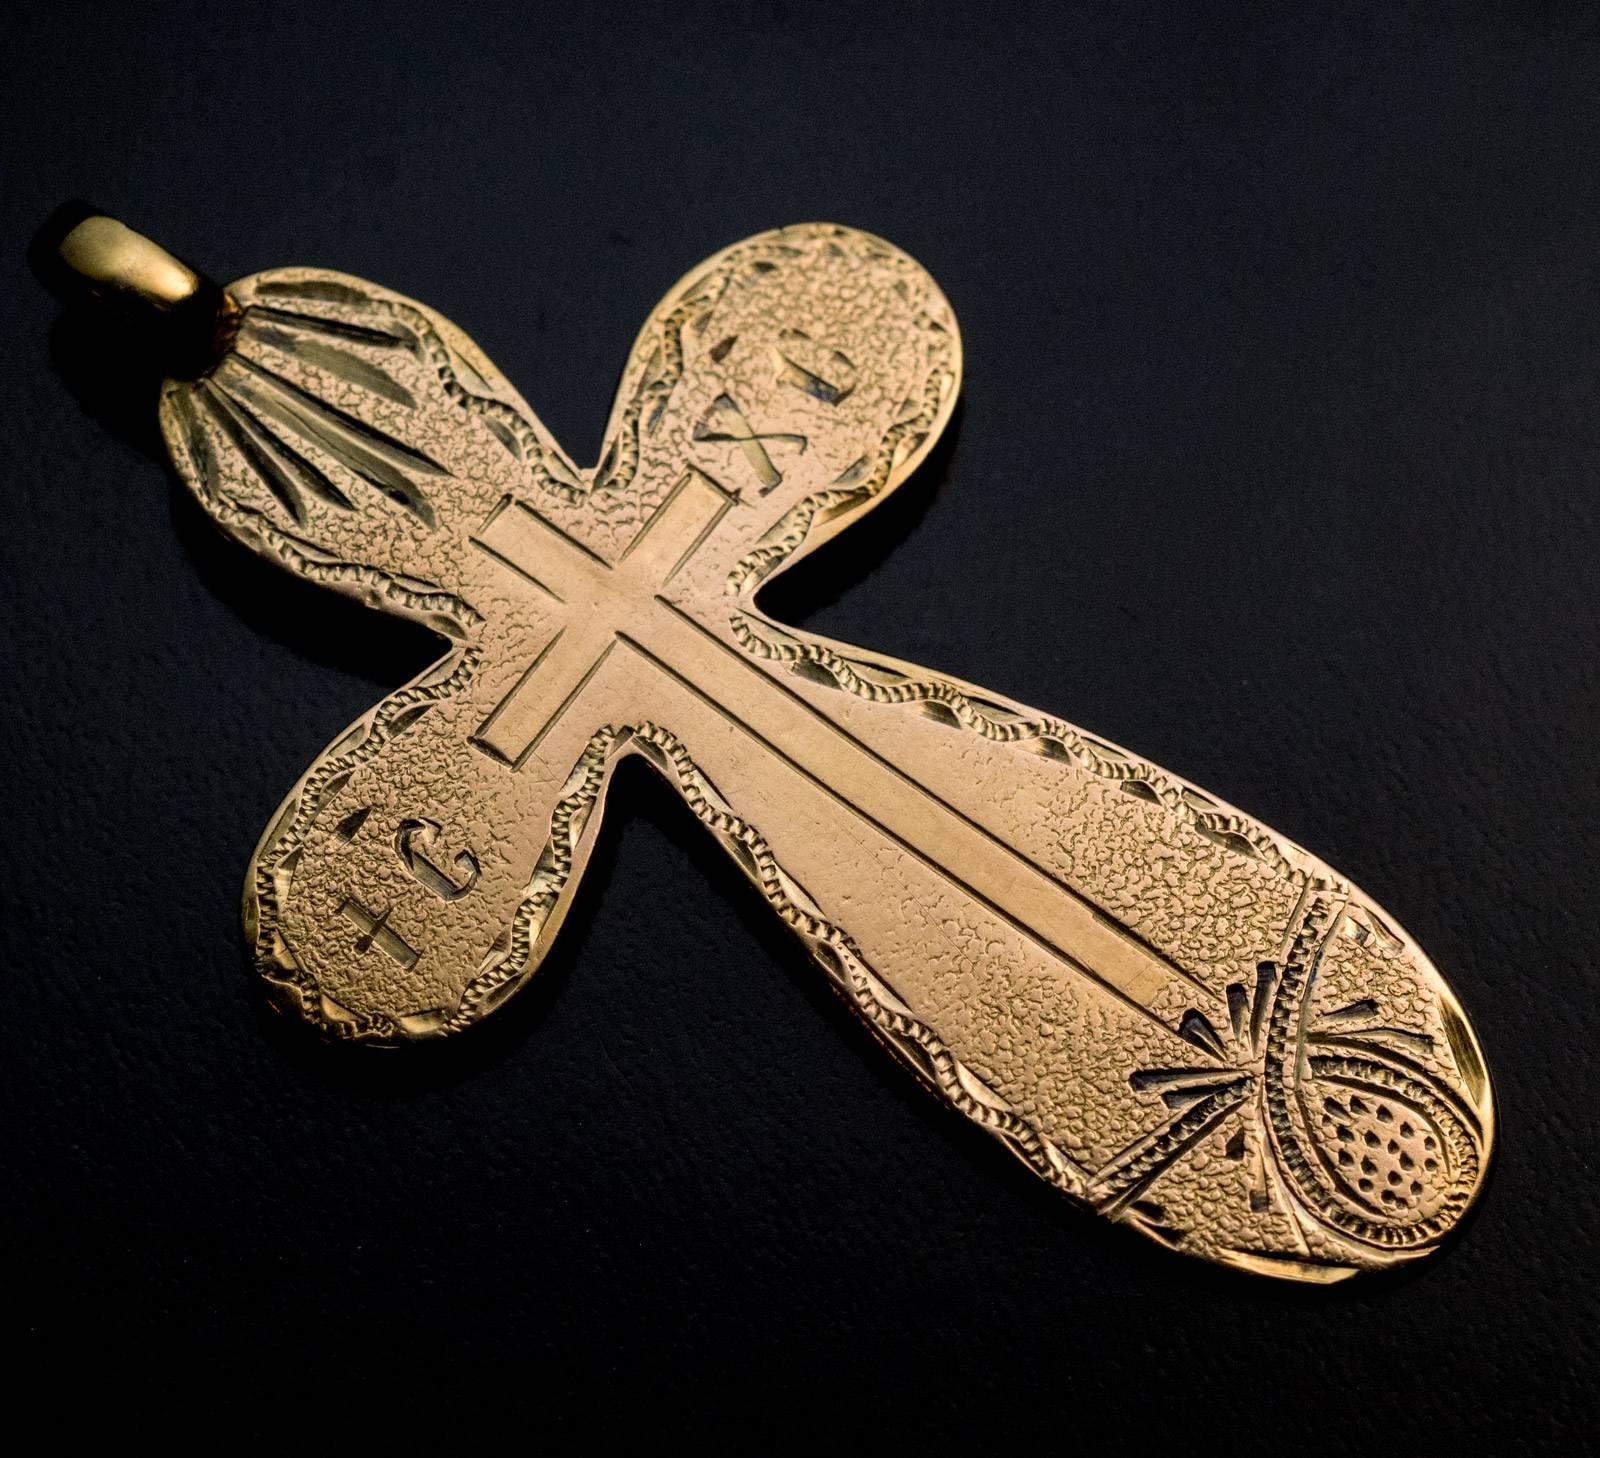 Made in Odessa in the 1870s
An antique 14K gold cross pendant is hand engraved with a shaded pattern.  The abbreviation IC – XC on the horizontal arms of the cross stands for Jesus Christ.
The cross is marked on back with maker’s initials, 56